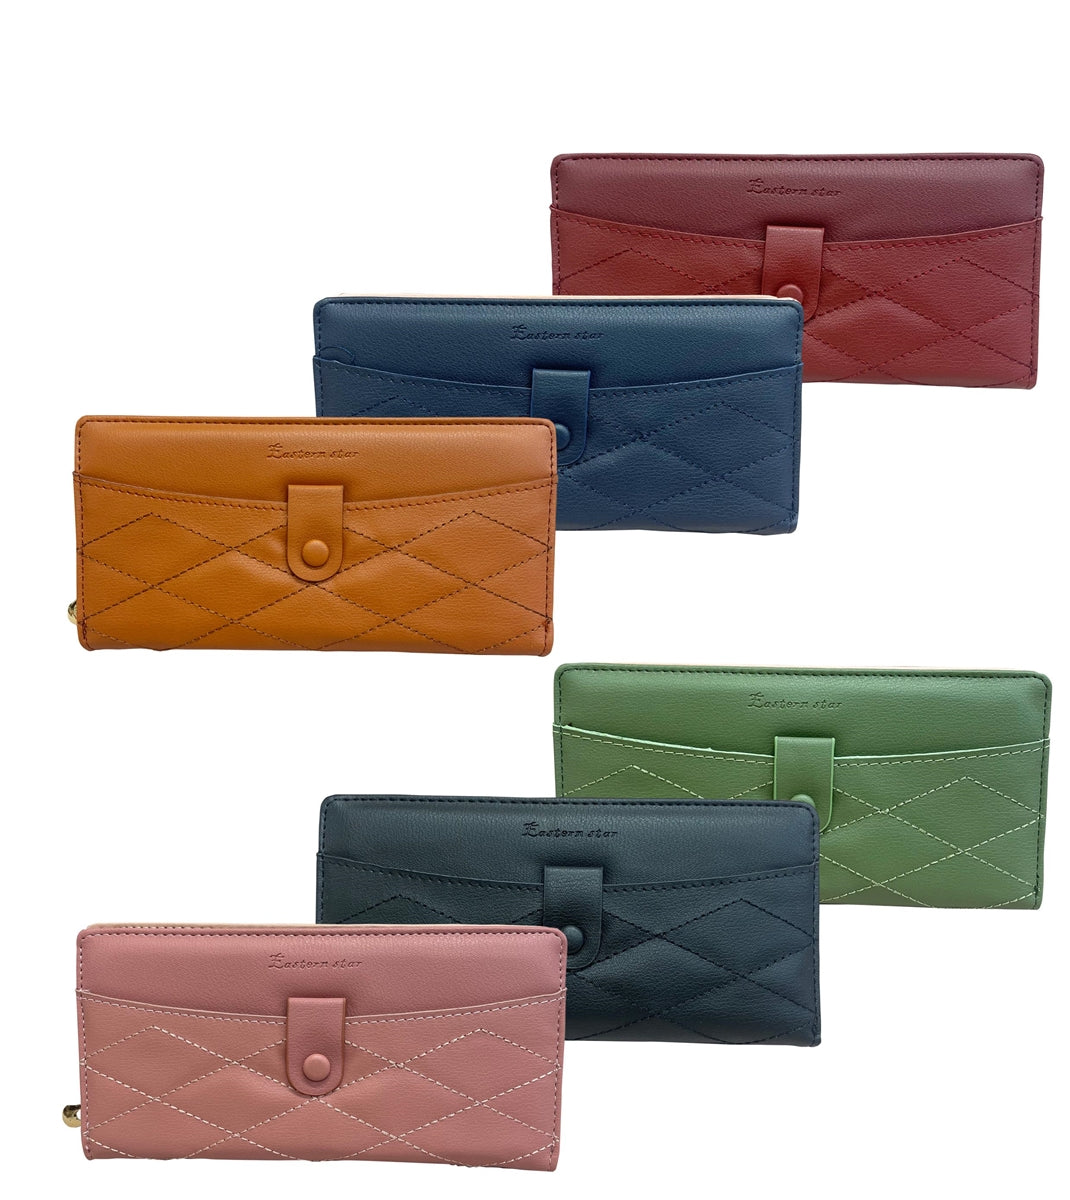 Quilted purse